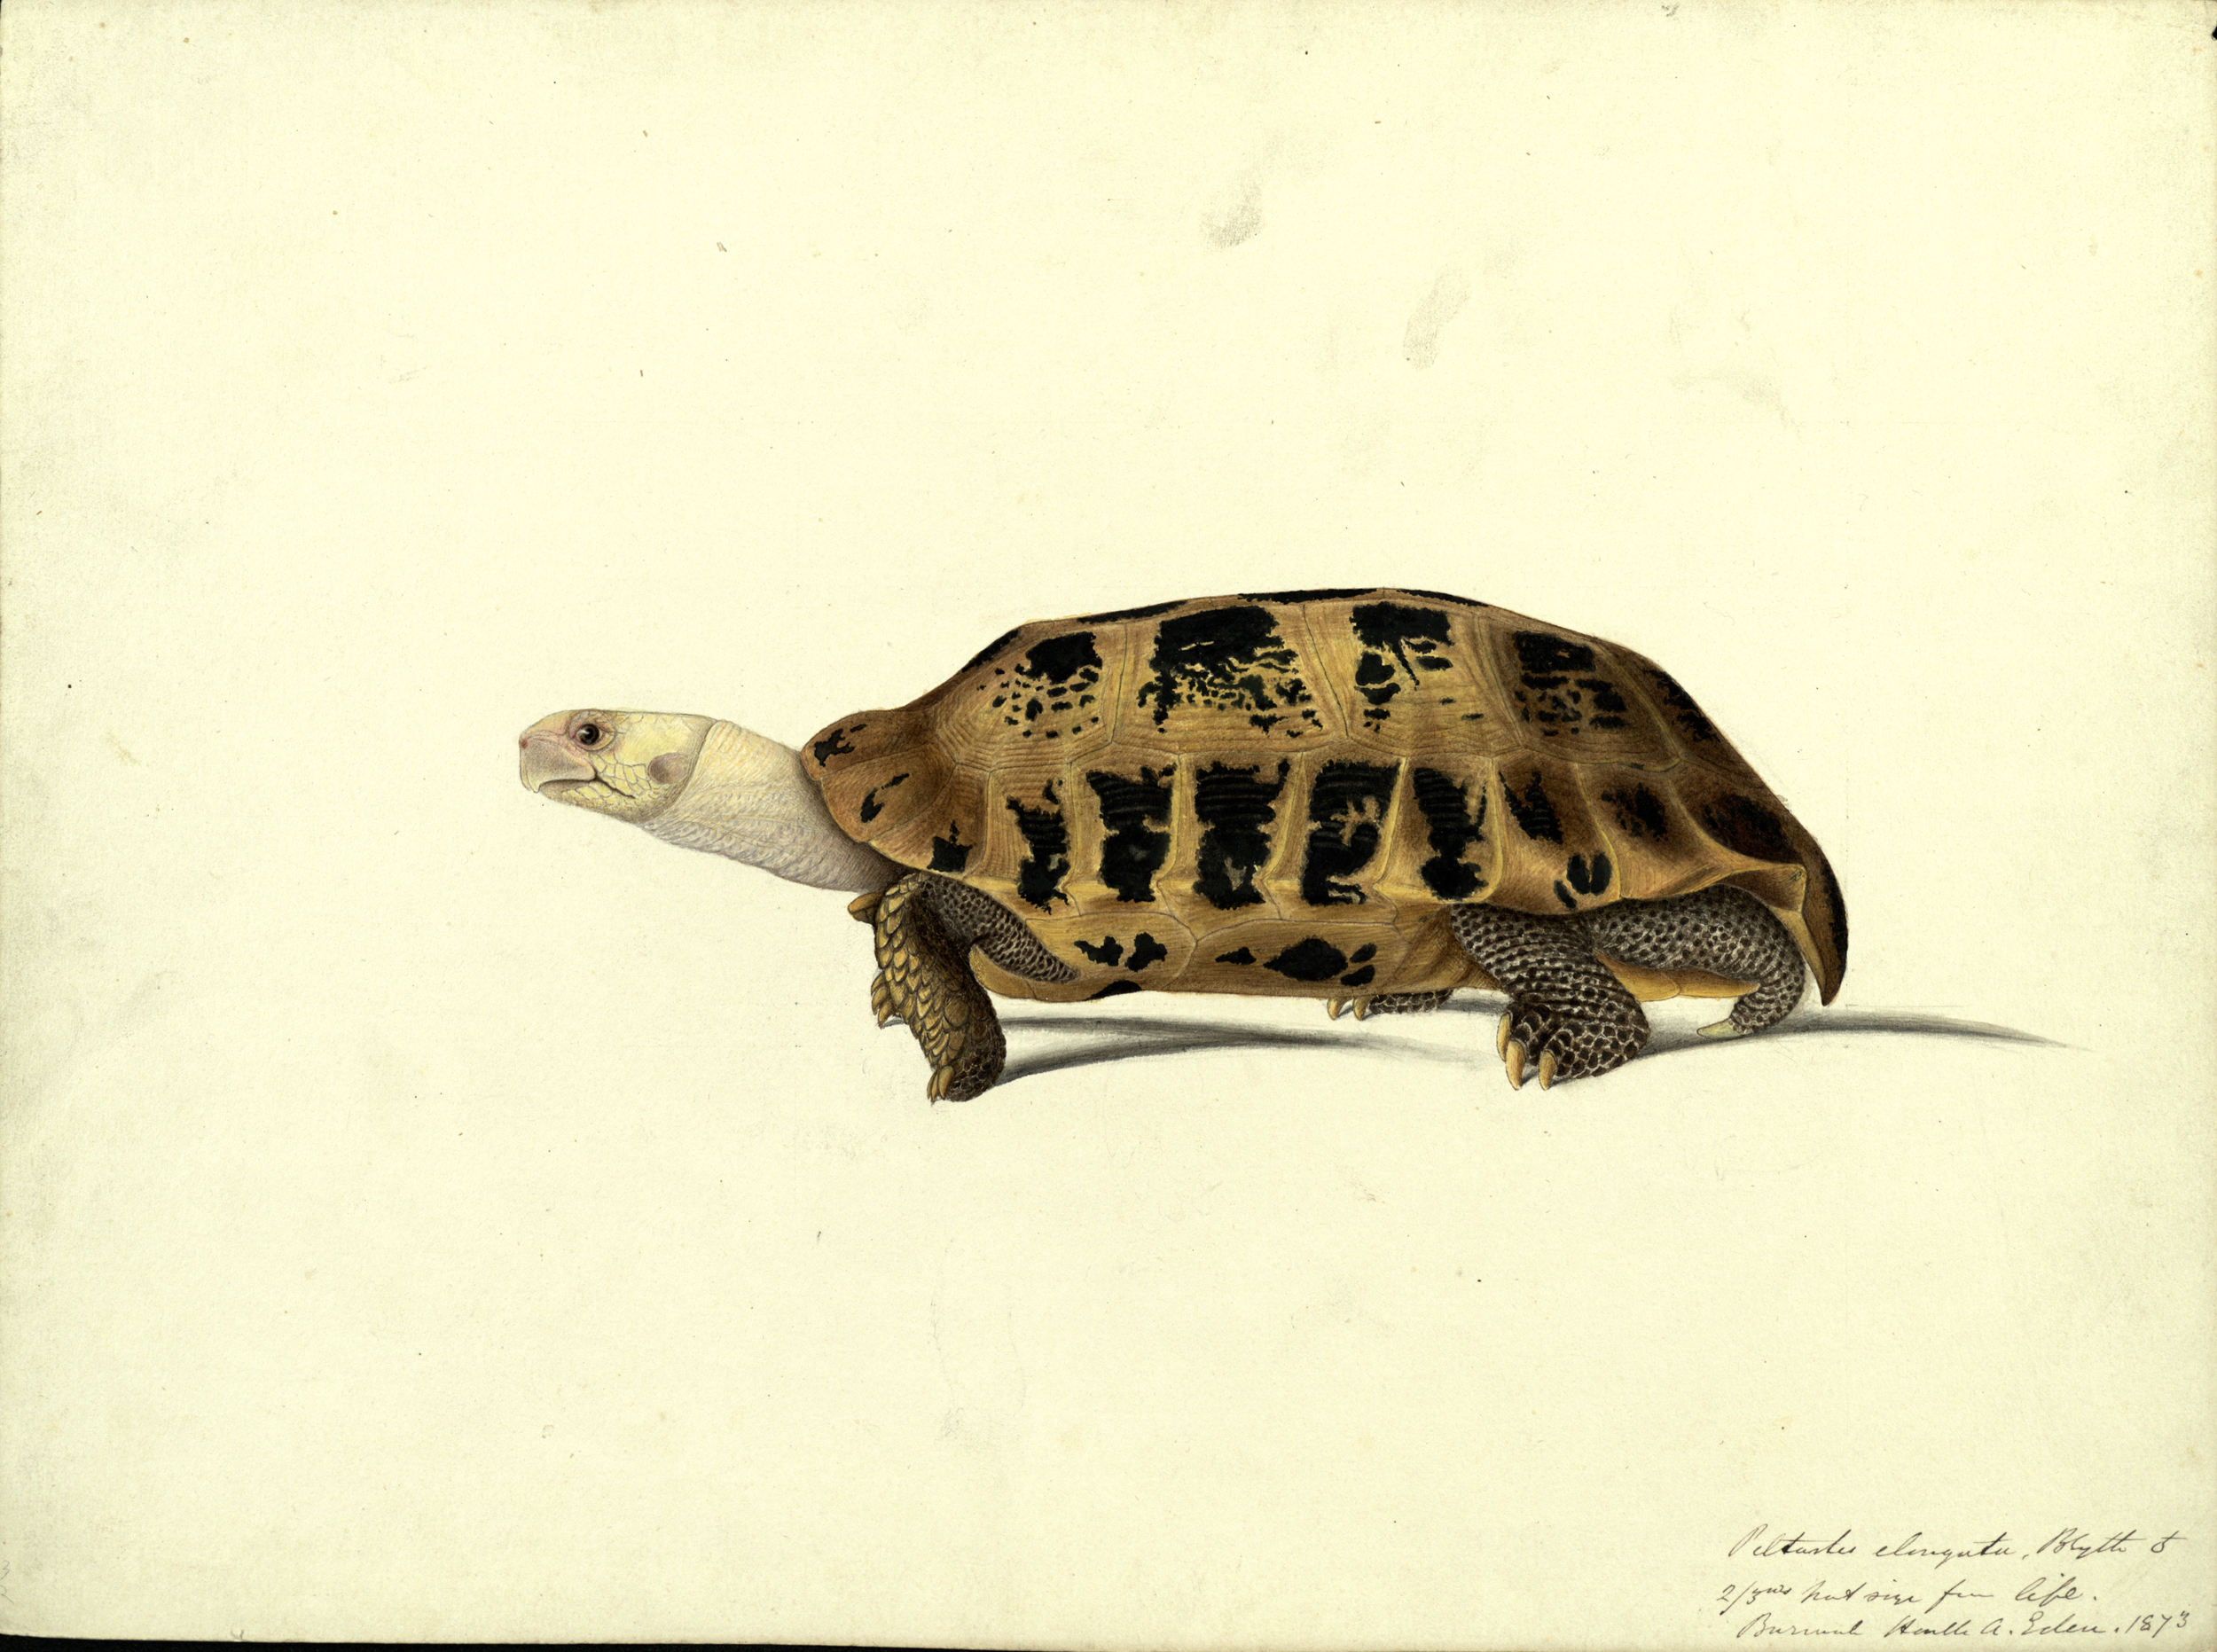 A hand-painted illustration of an Elongated tortoise, 1873. by Scottish naturalist John Anderson (St Andrews manuscript ms30413)